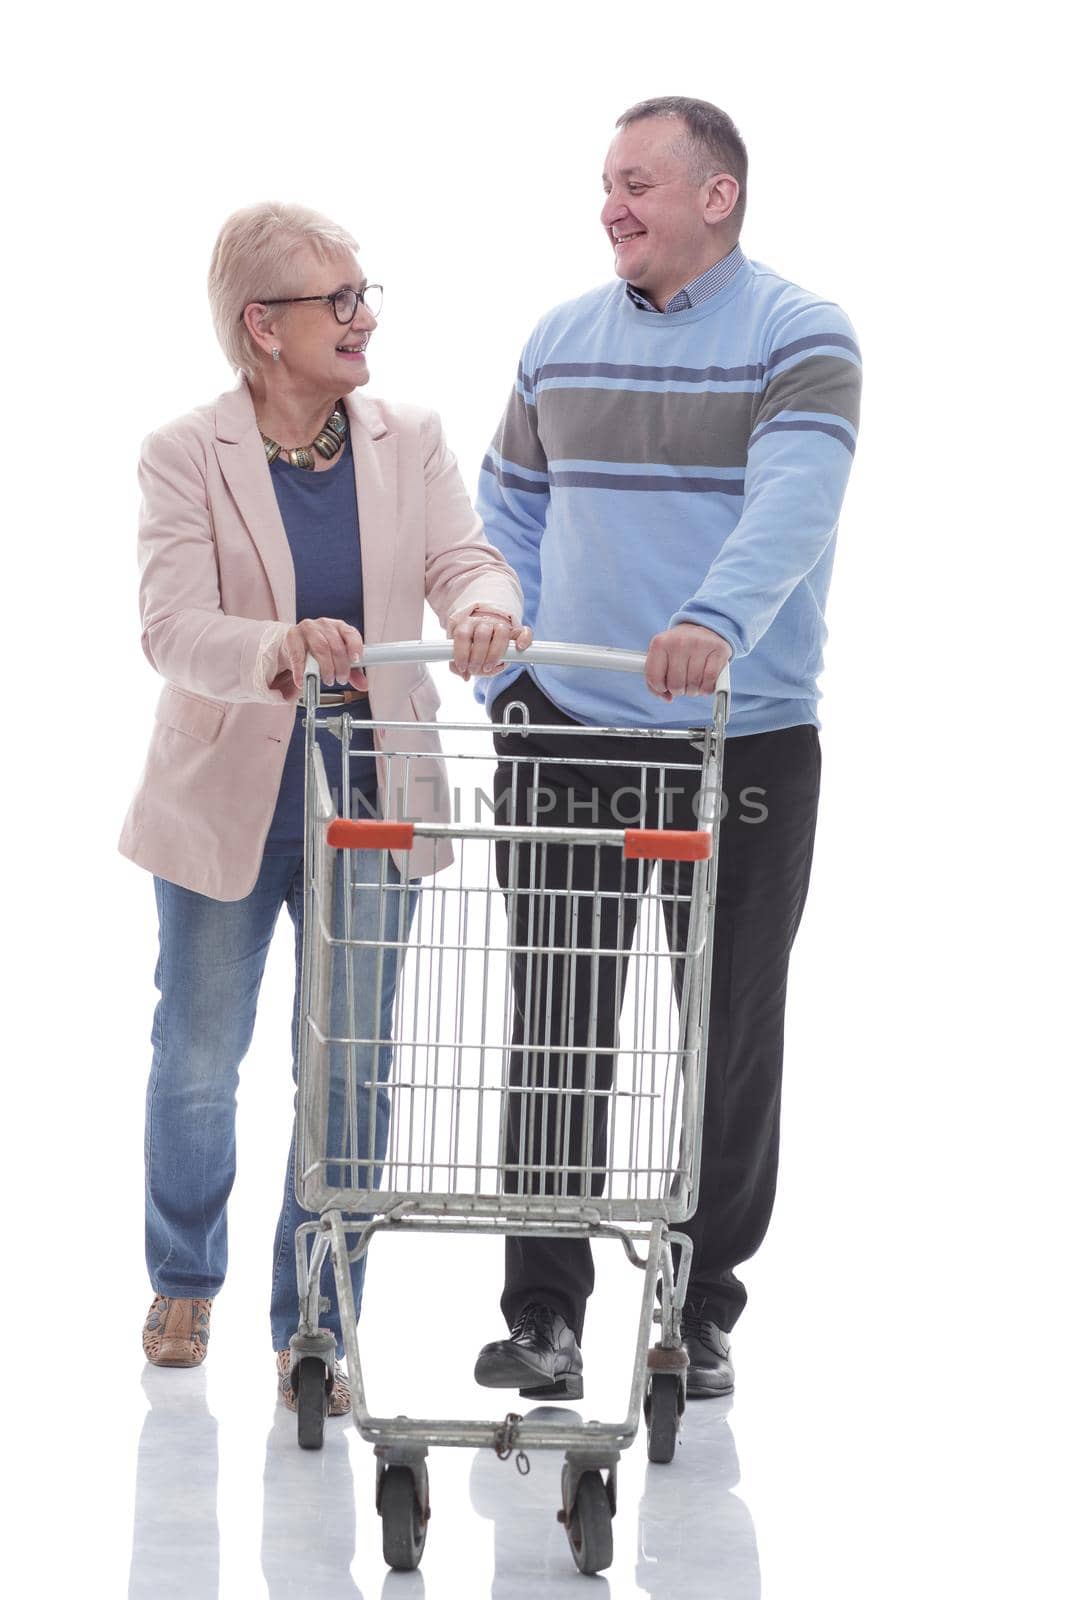 in full growth. happy married couple with shopping cart. isolated on a white background